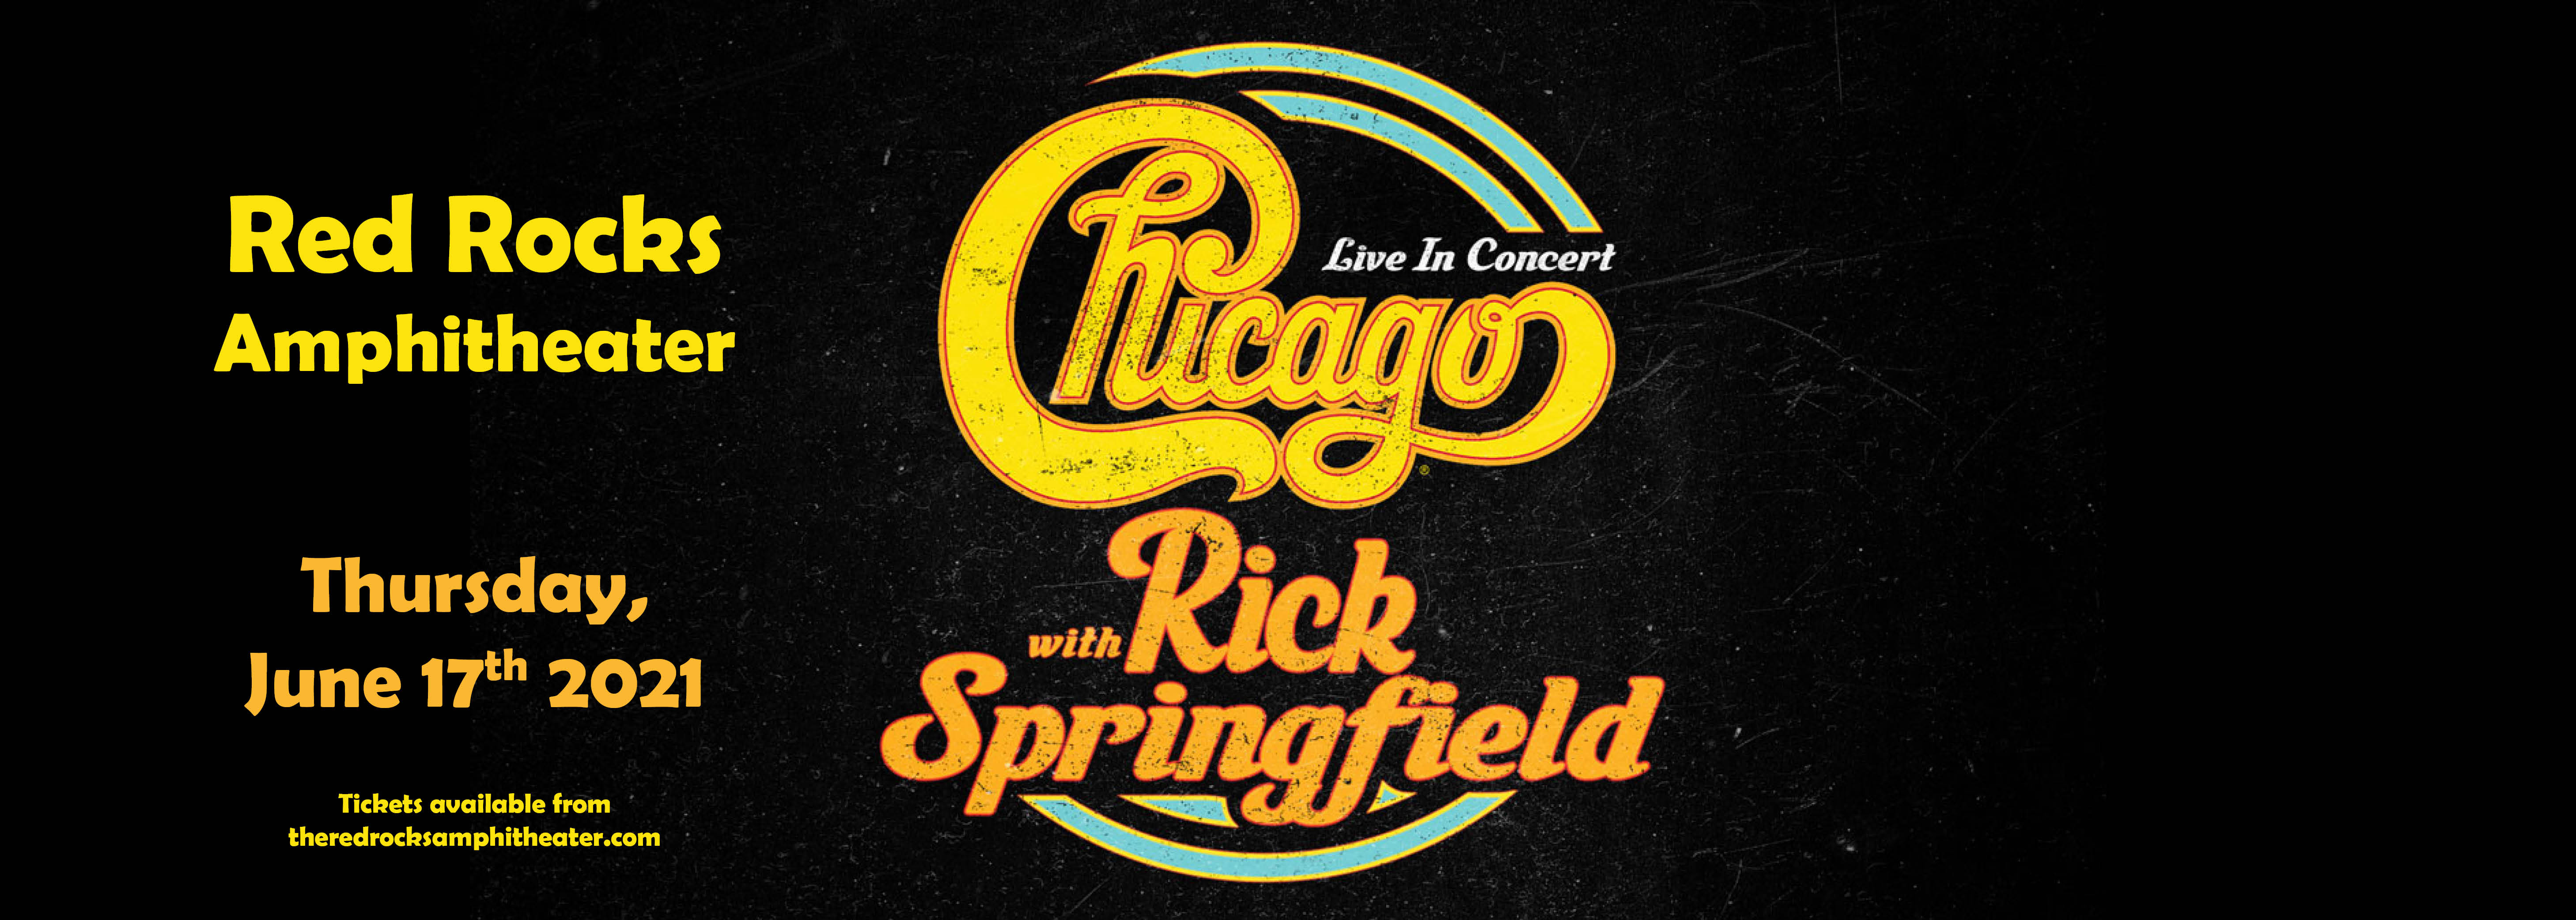 Chicago - The Band & Rick Springfield [CANCELLED] at Red Rocks Amphitheater